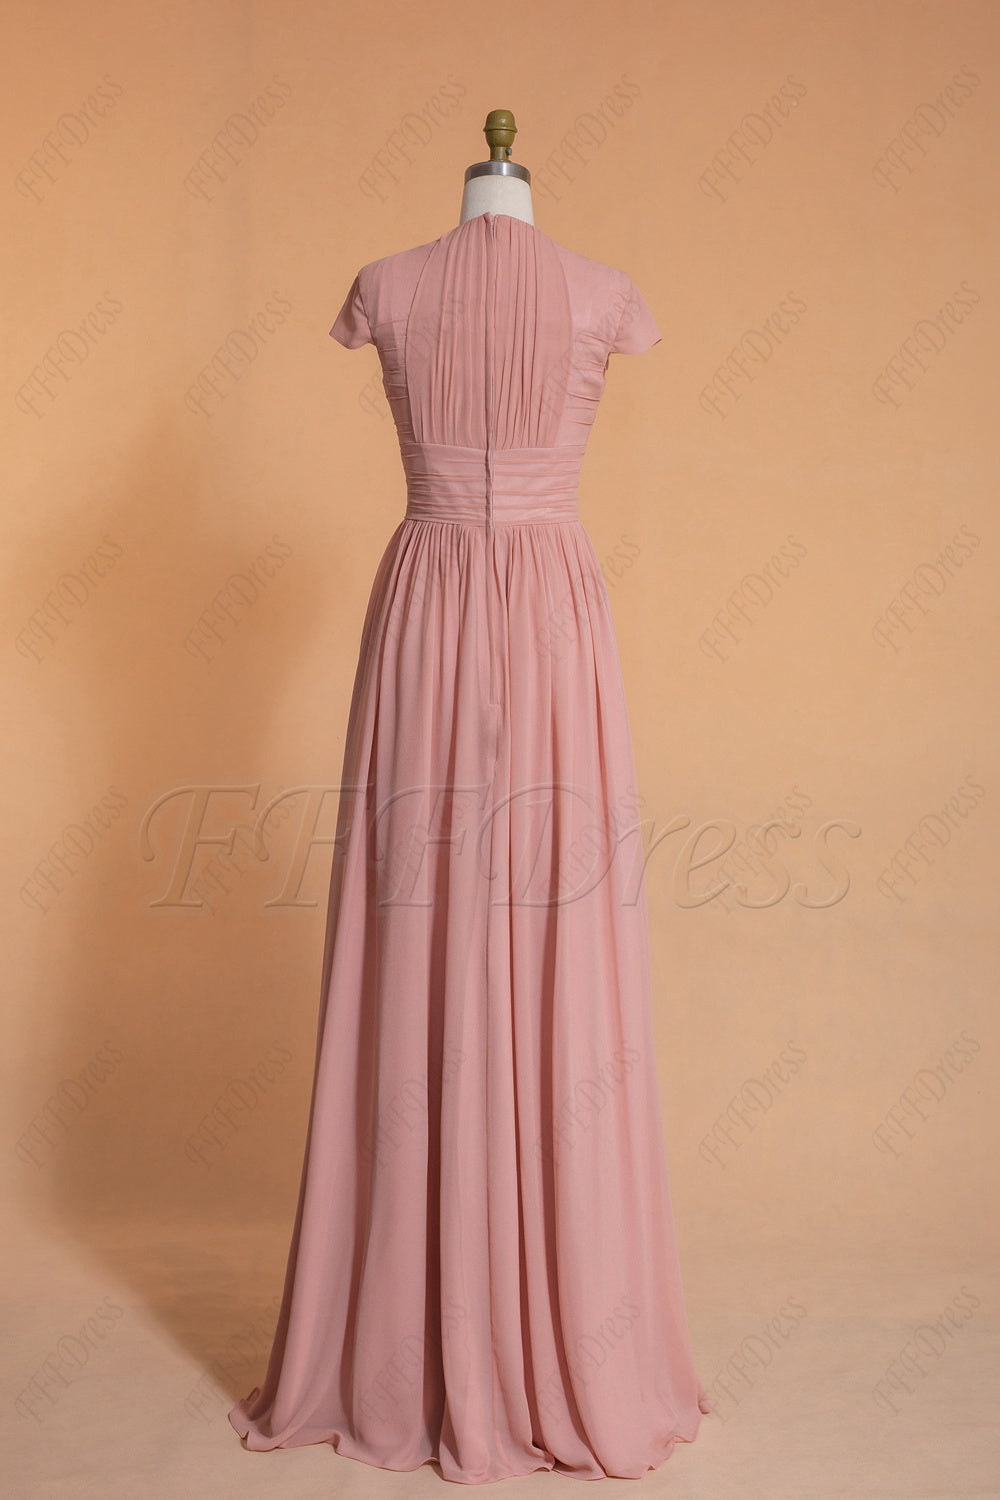 Blush rose modest bridesmaid dresses long with cap sleeves